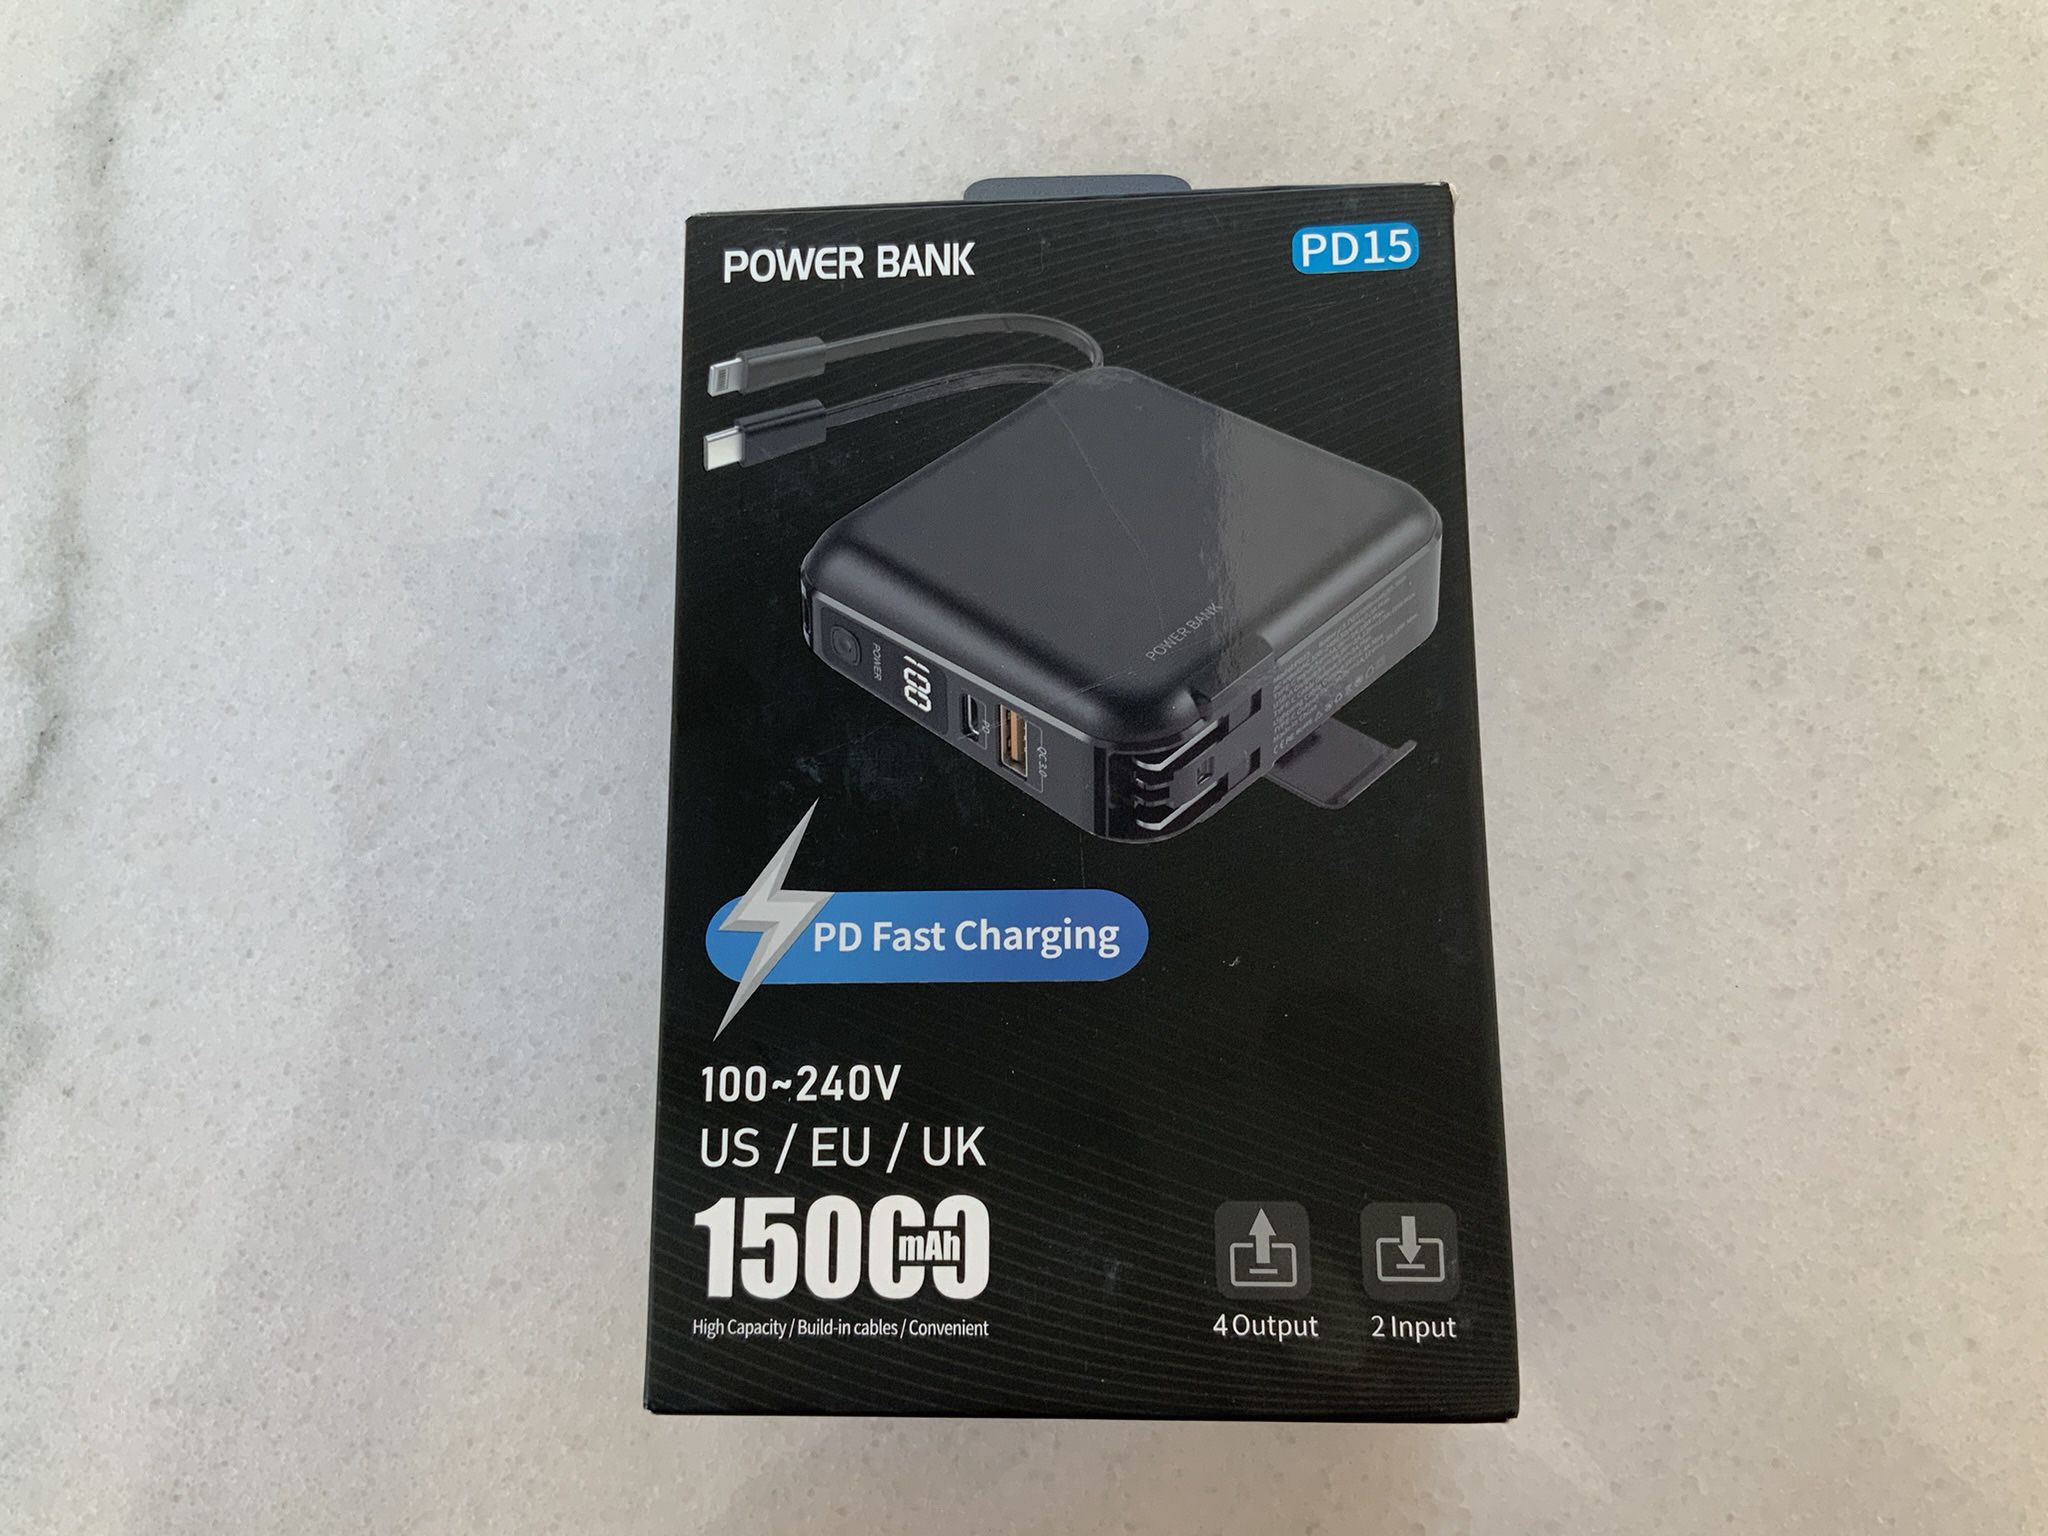 Power Bank Portable Charger-Hub Wall Plug In Built, New